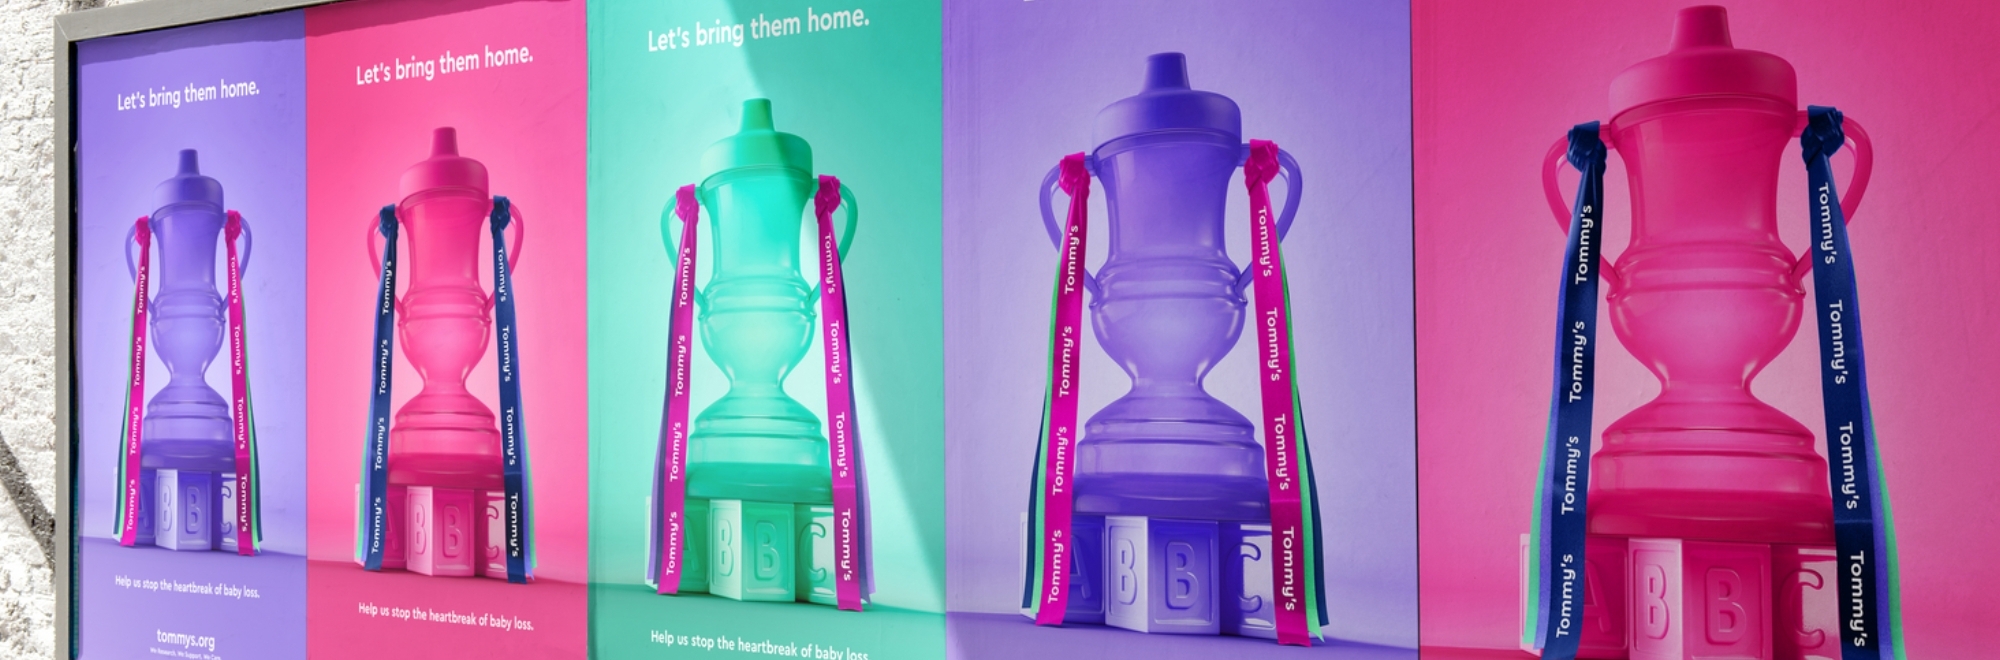 Let’s Bring Them Home: Baby loss charity Tommy's creates campaign around the Women’s FA Cup Final